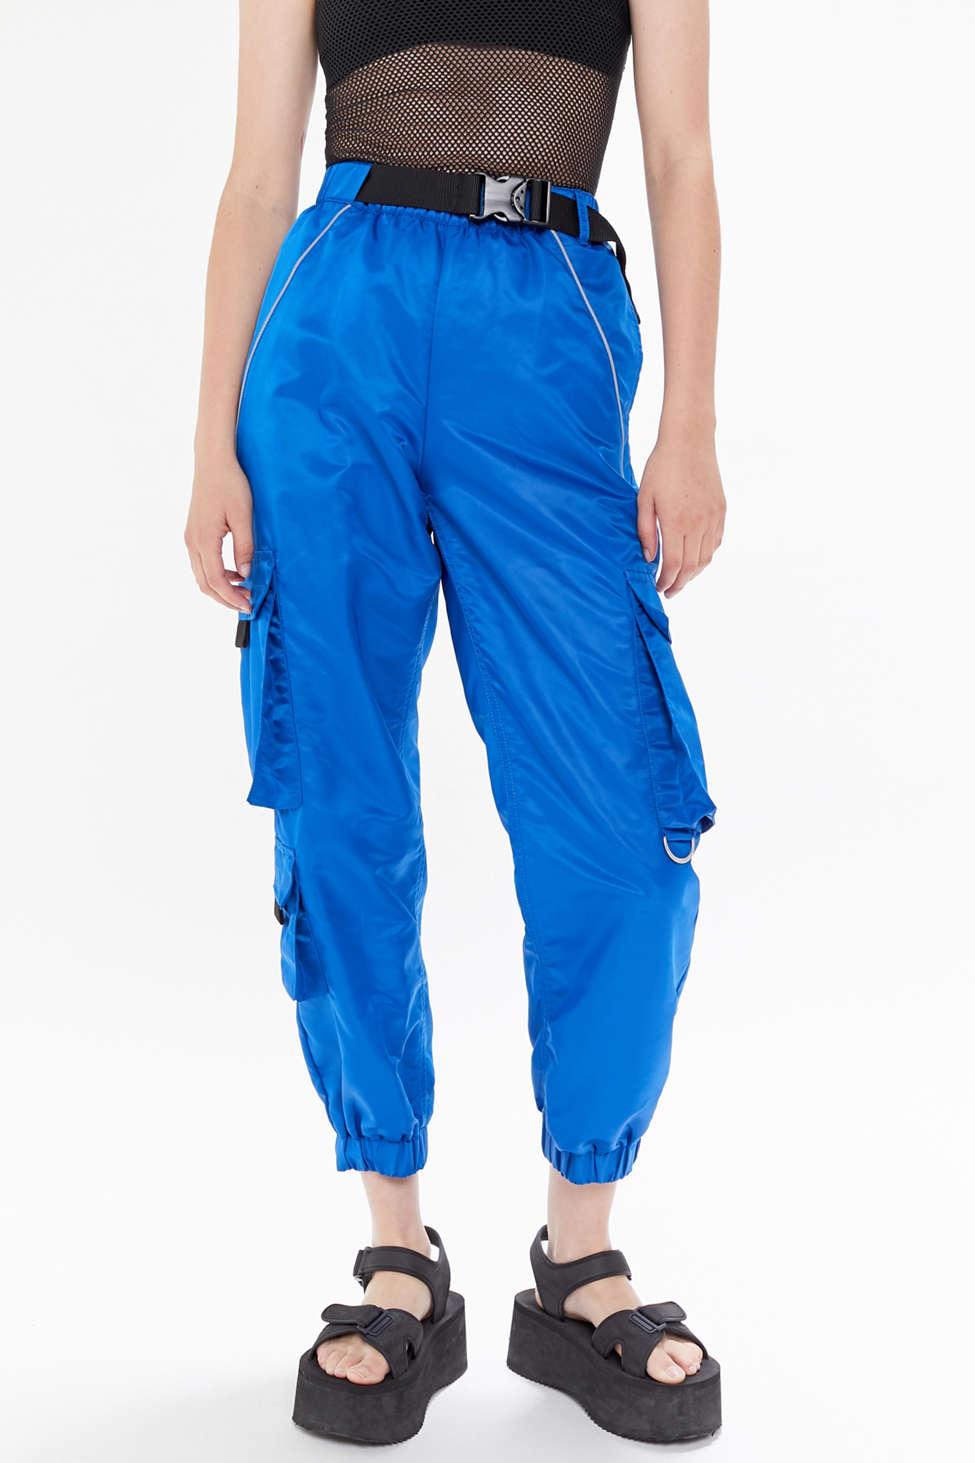 Urban Outfitters Synthetic Uo Katya Nylon Buckle Cargo Pant in Blue - Lyst